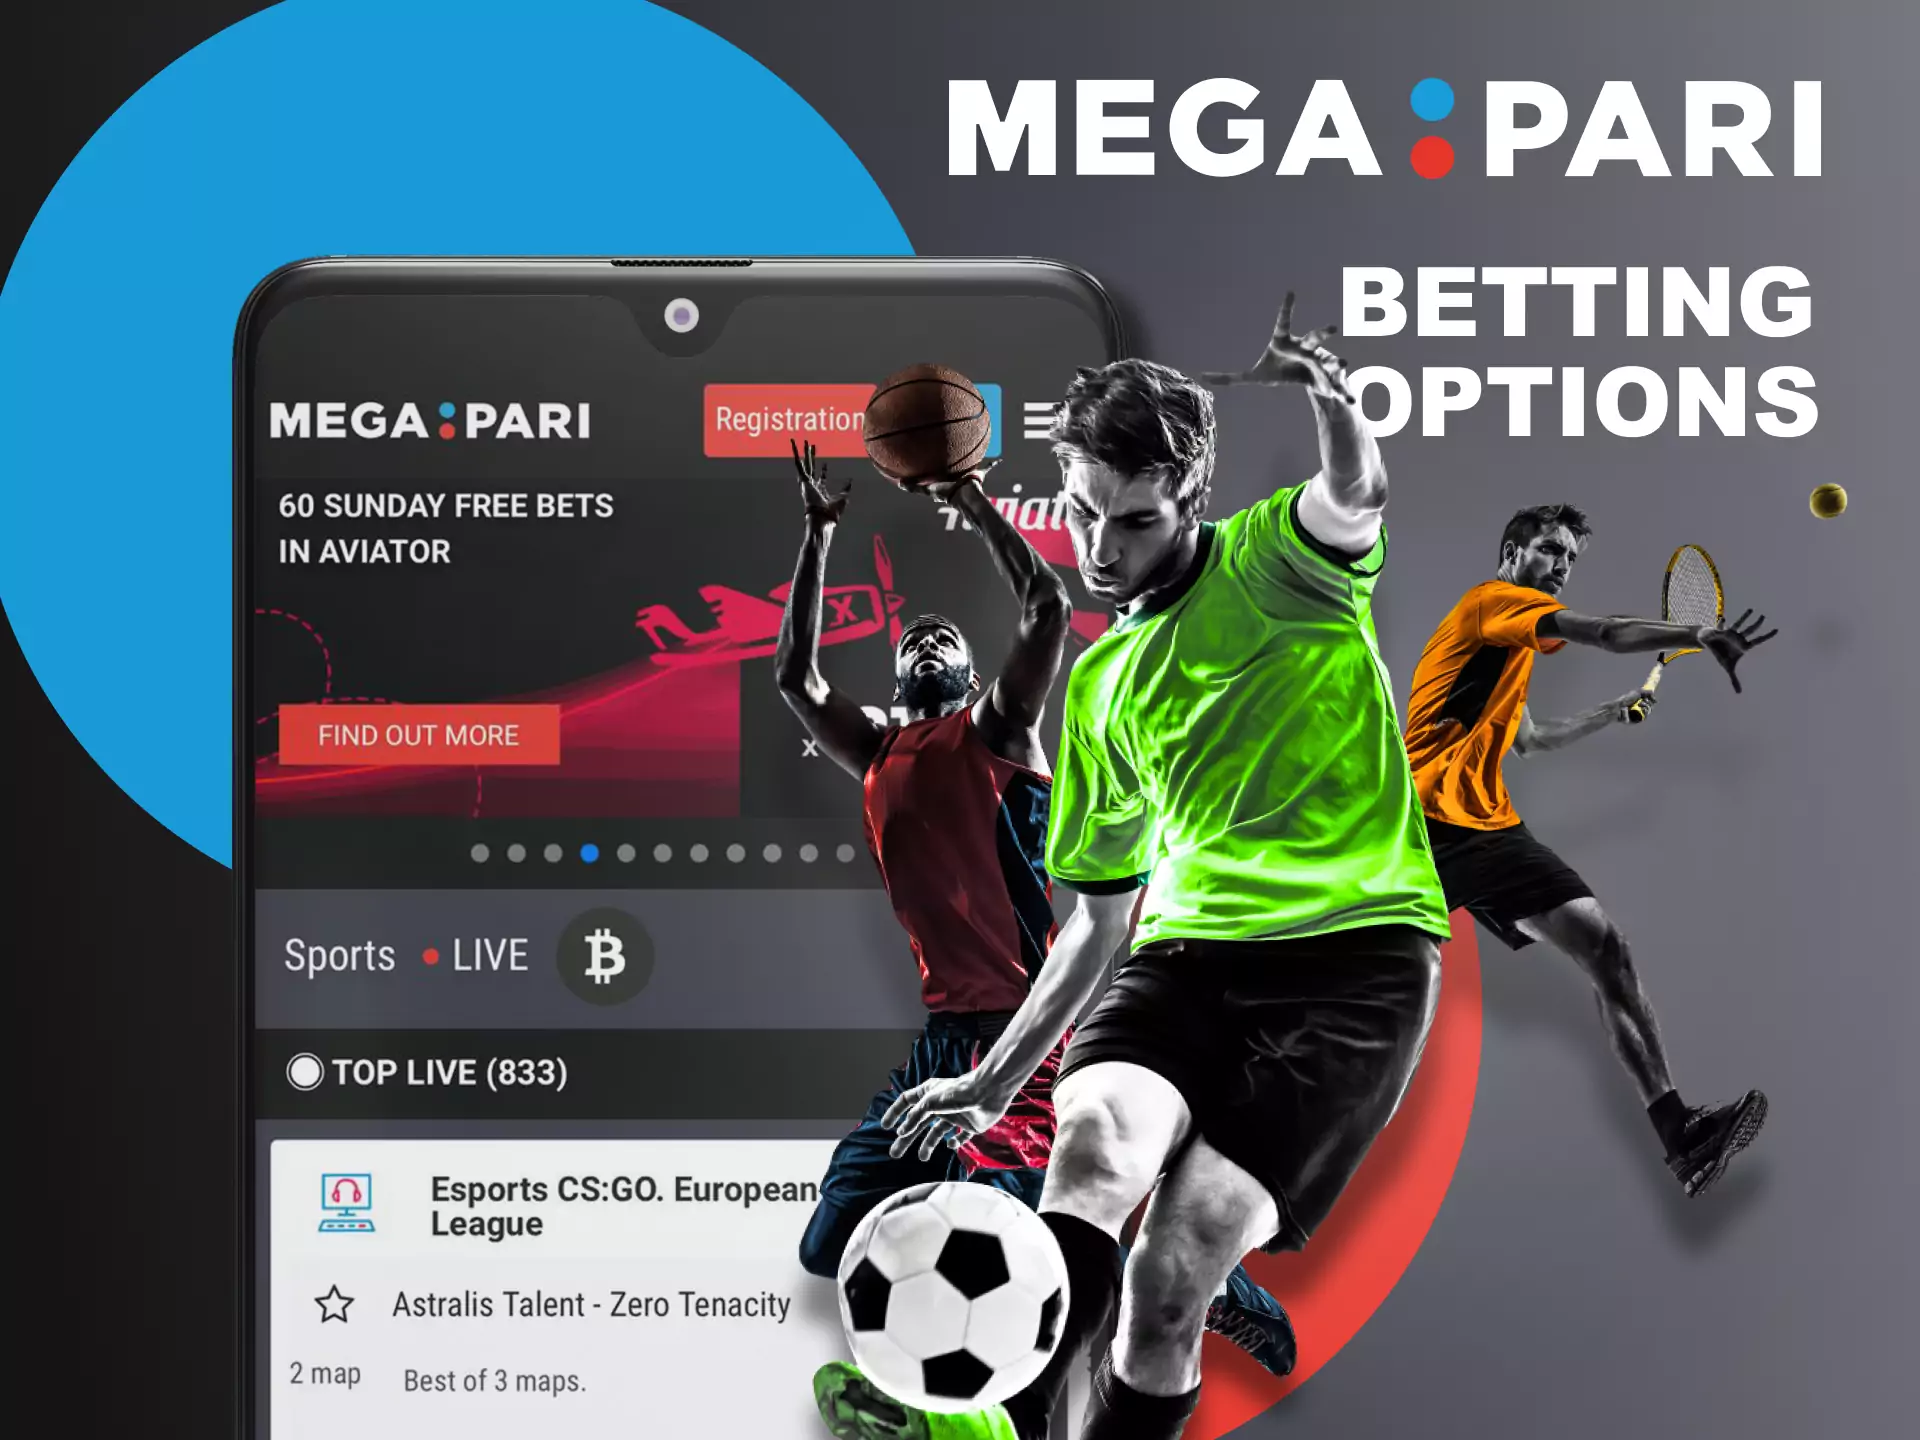 Try different options for sports betting in the Megapari app.